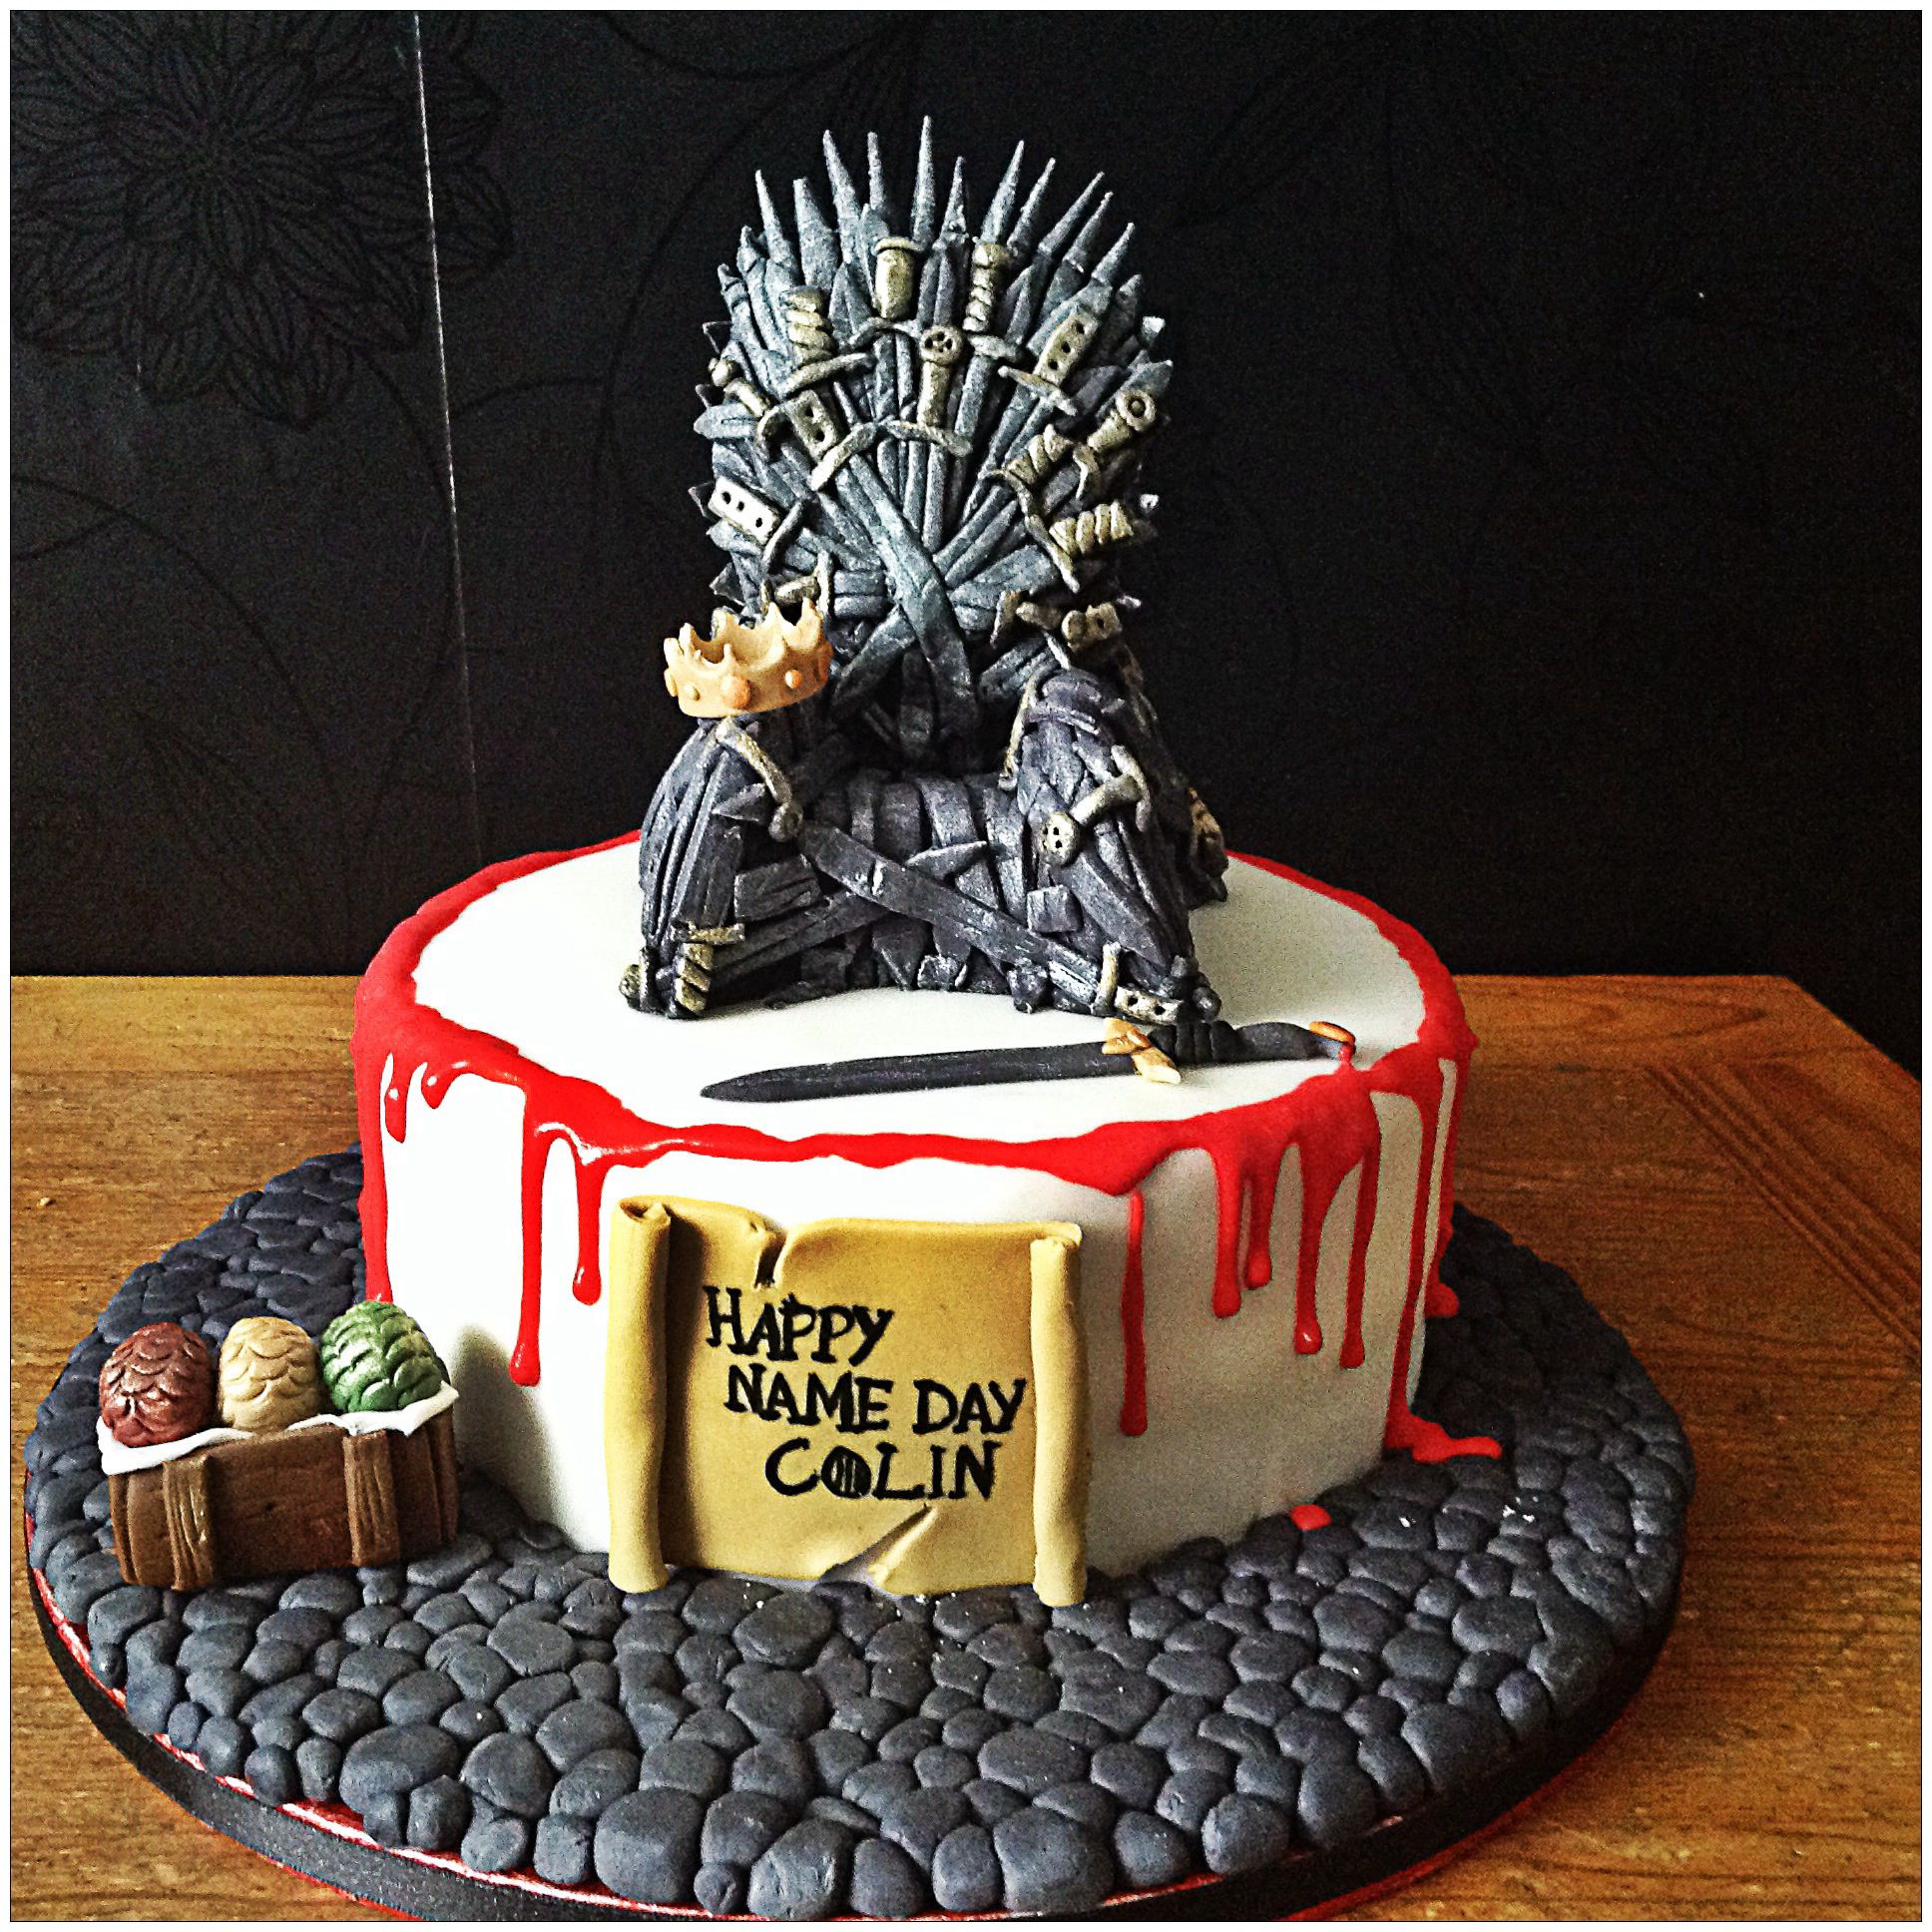 Game Of Thrones Birthday Cake
 Game of Thrones cake I made with inspiration from Izzys